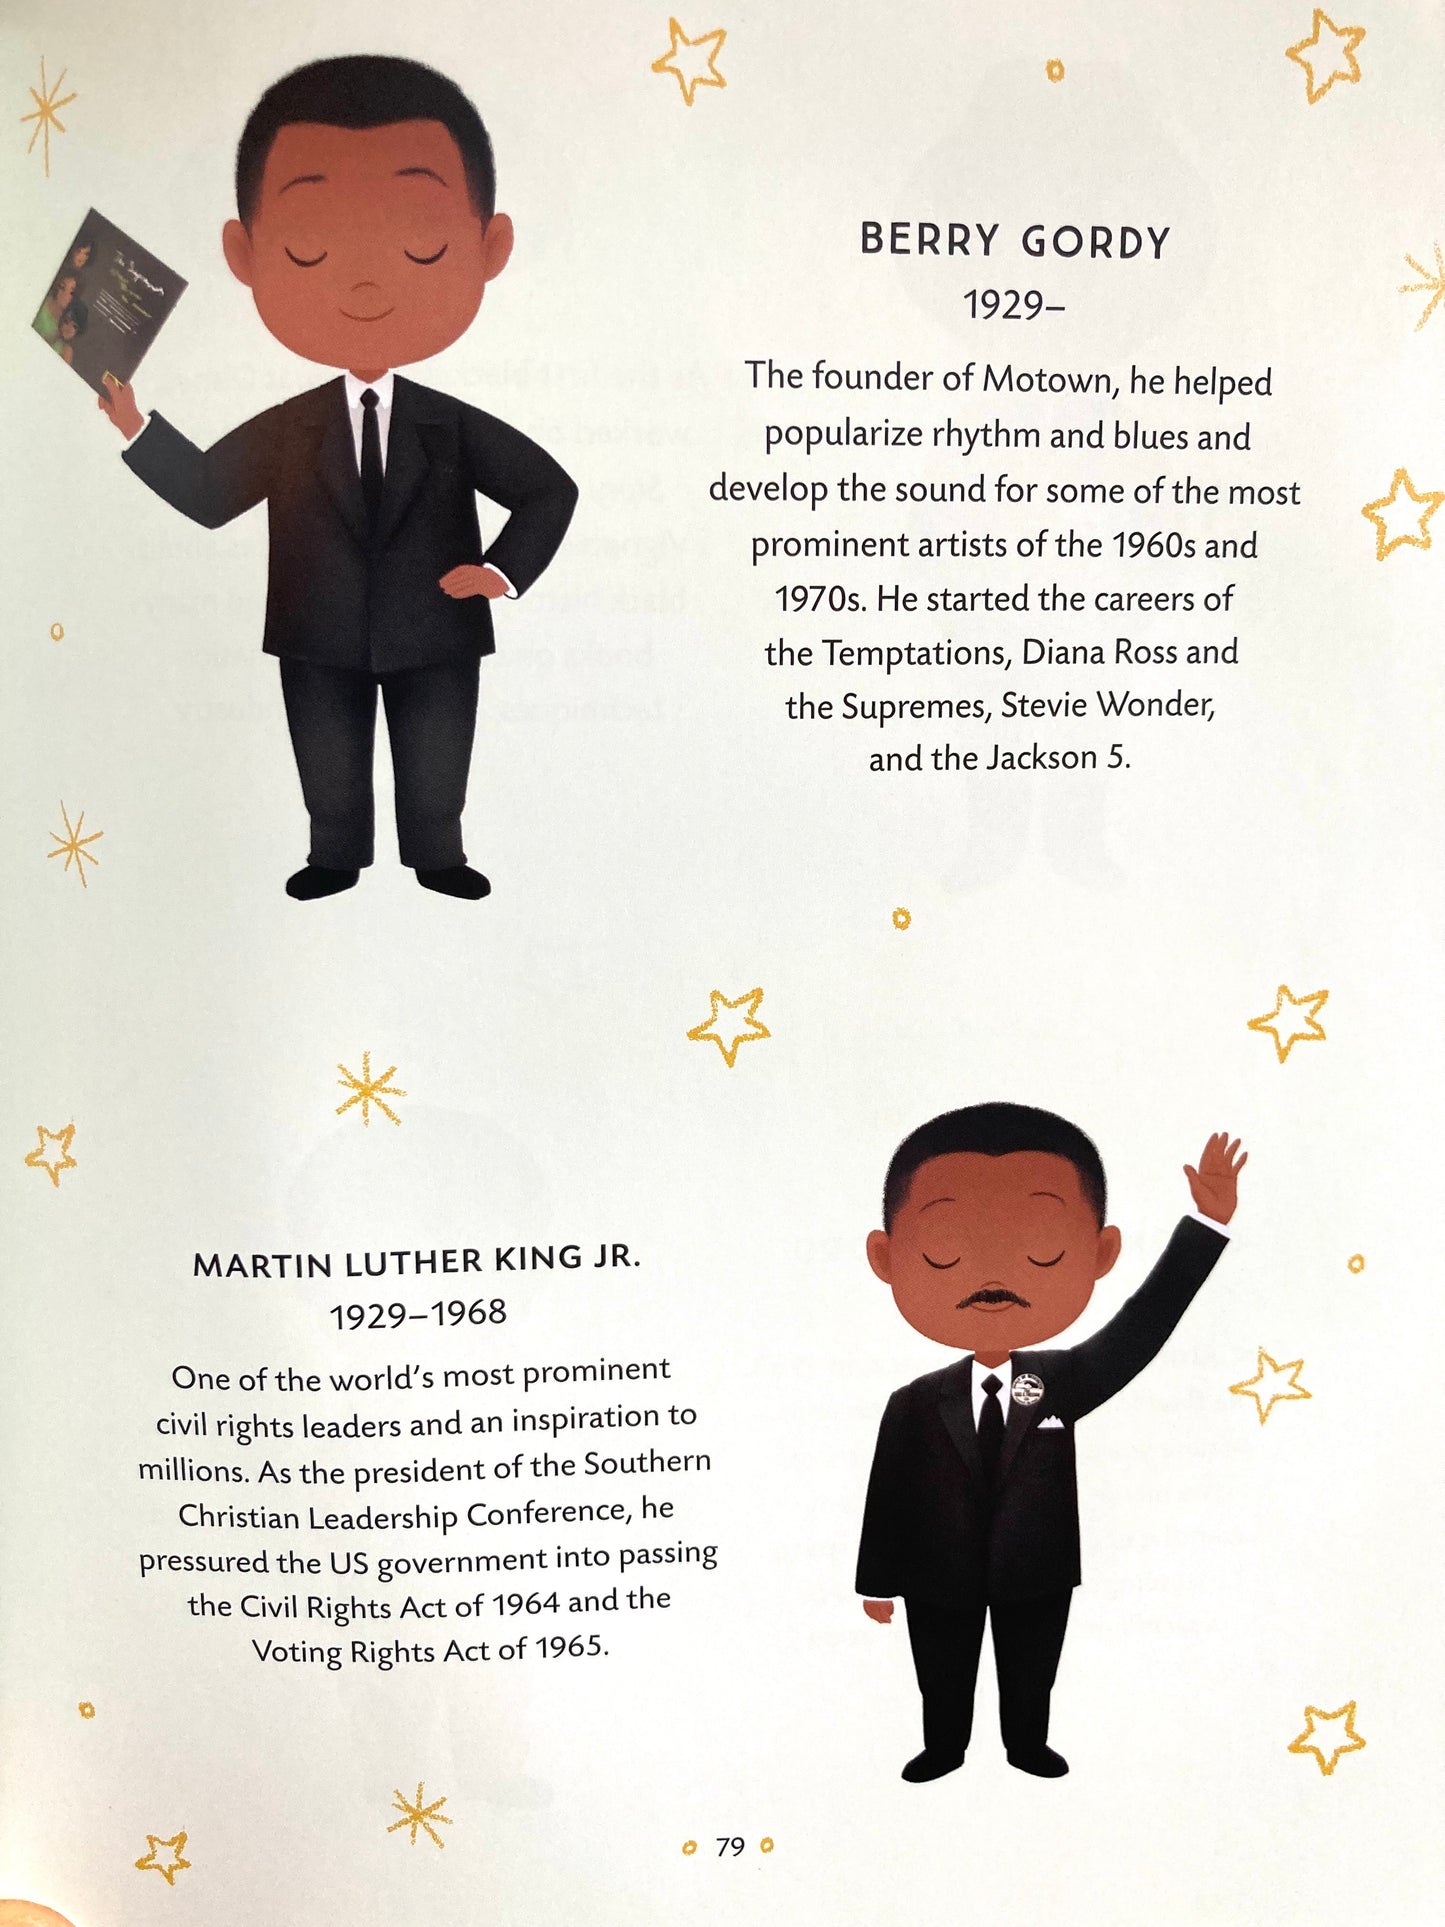 Educational Book - LITTLE LEGENDS: EXCEPTIONAL MEN IN BLACK HISTORY